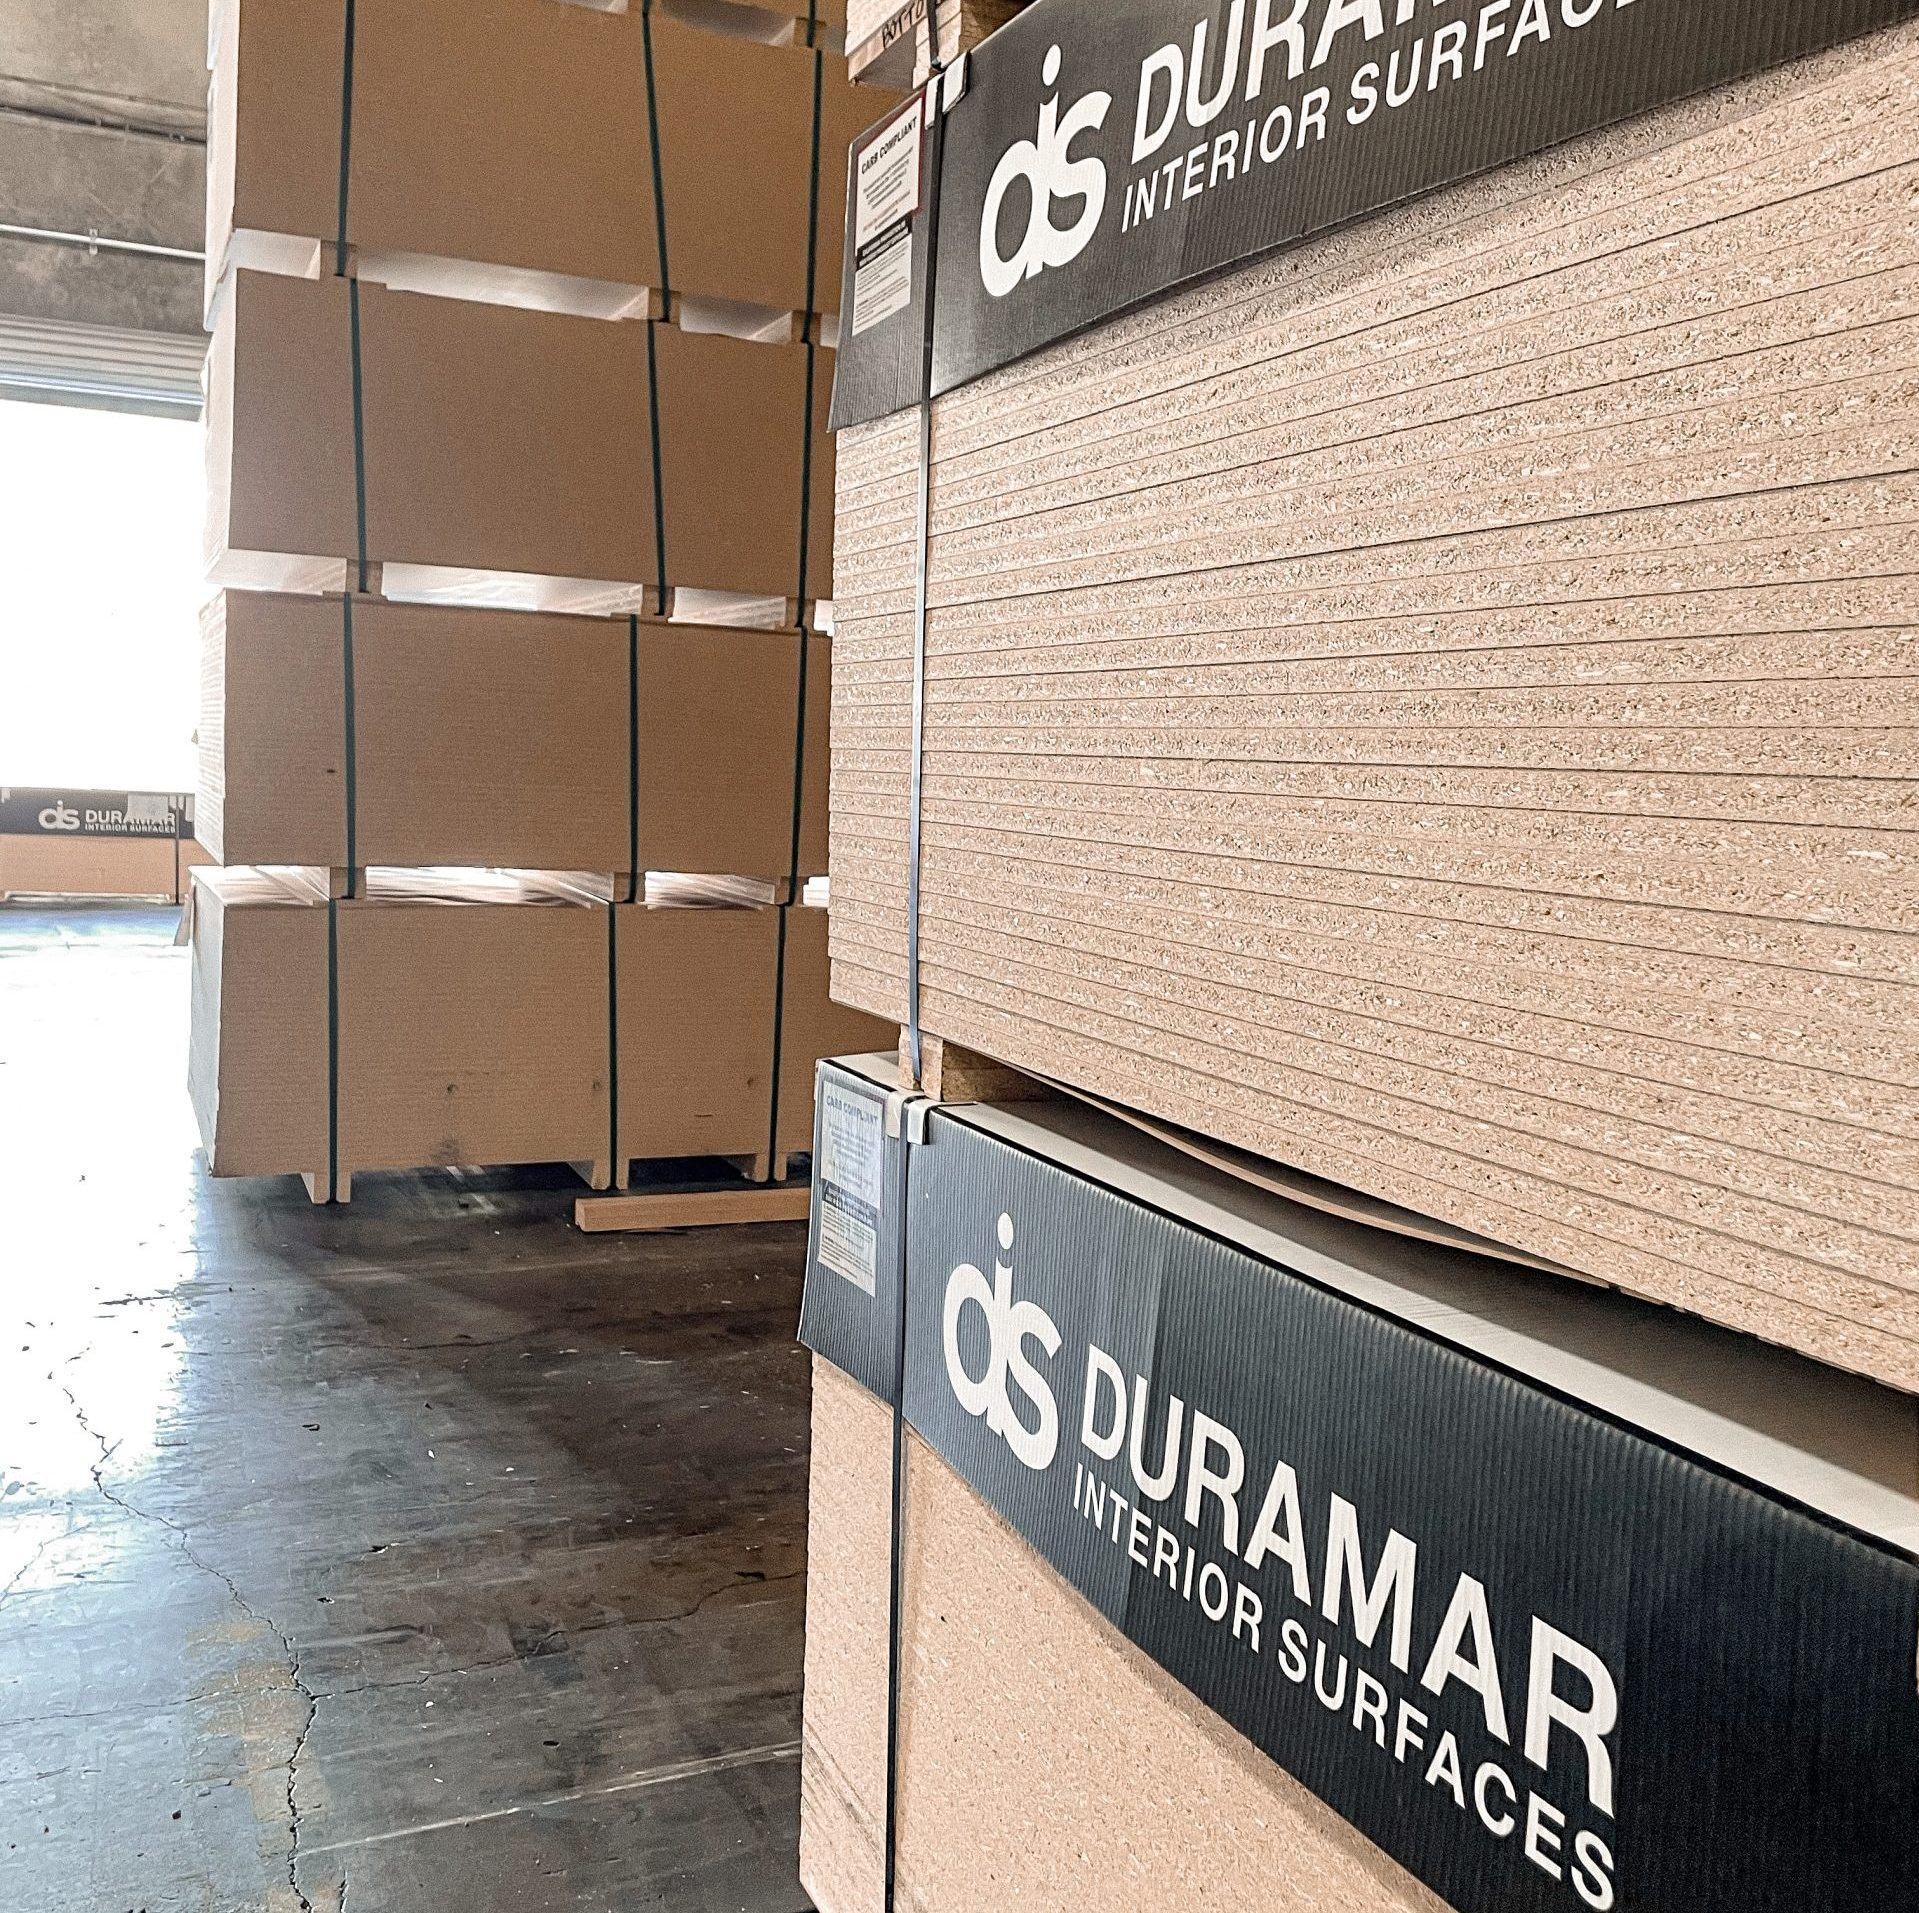 Duramar Interior Surfaces Warehouse Hallway with finished product stacked.